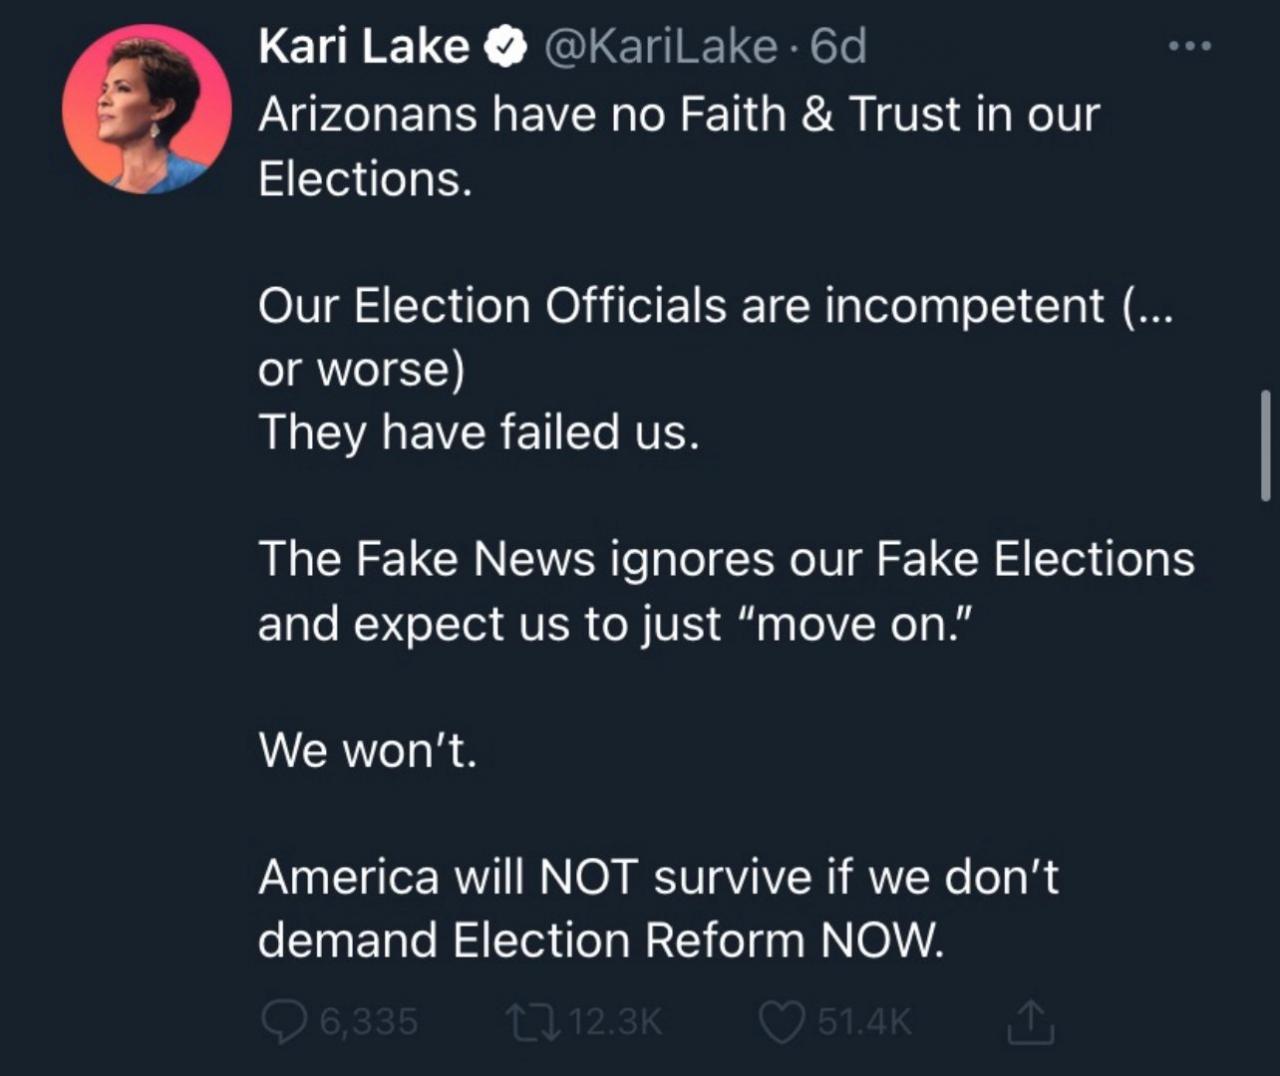 Twitter Is STILL Disabling Kari Lake And Other Republicans’ Like-Retweet Feature On Rigged 2022 Election Tweets – After Katie Hobbs Linked to Censorship of AZ Republican Accounts